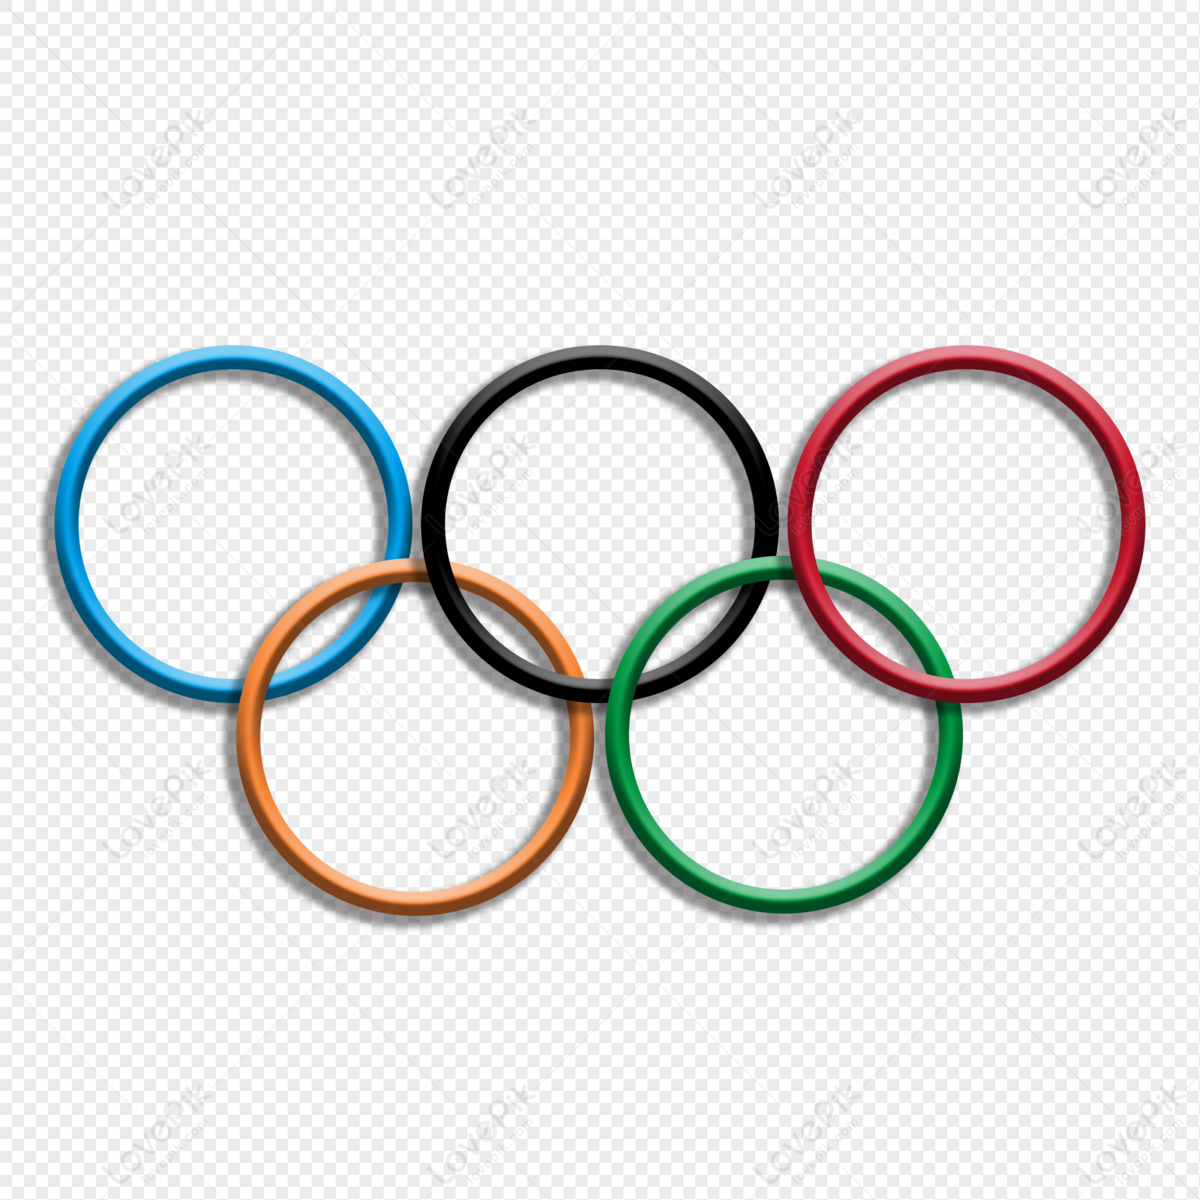 Detail Is The Olympic Logo Copyrighted Nomer 16